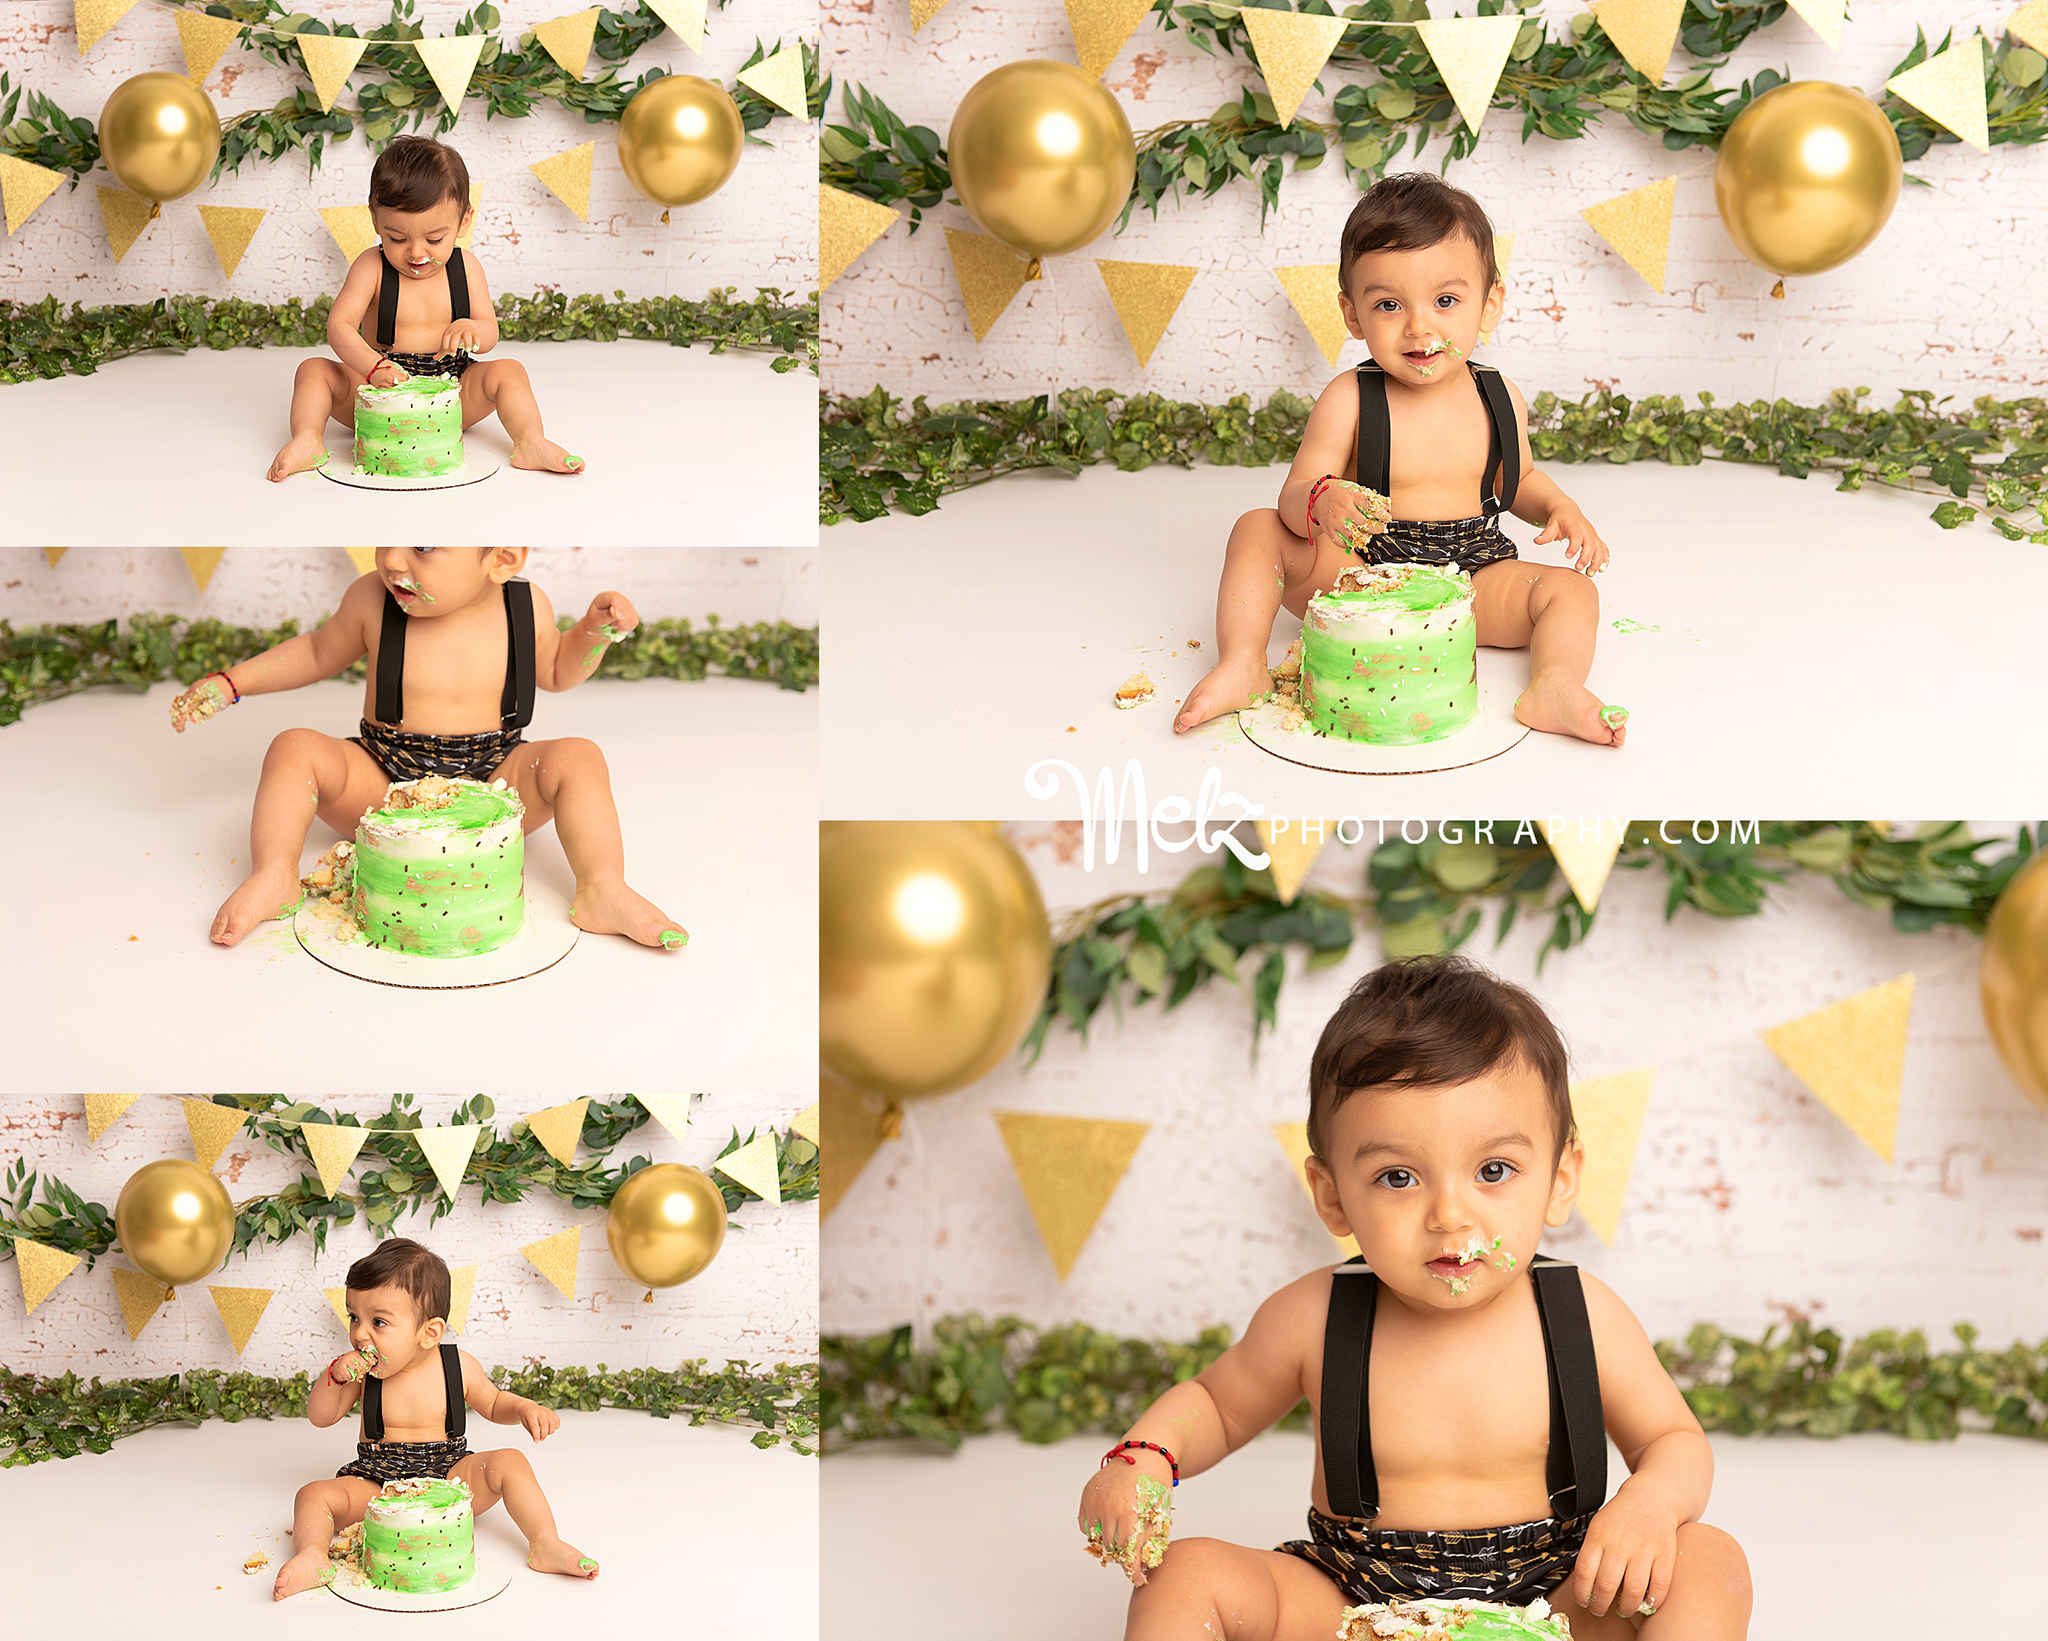 mateos-first-birthday-session-belleville-new-jersey-birthday-photographer-melz-photography-3.png